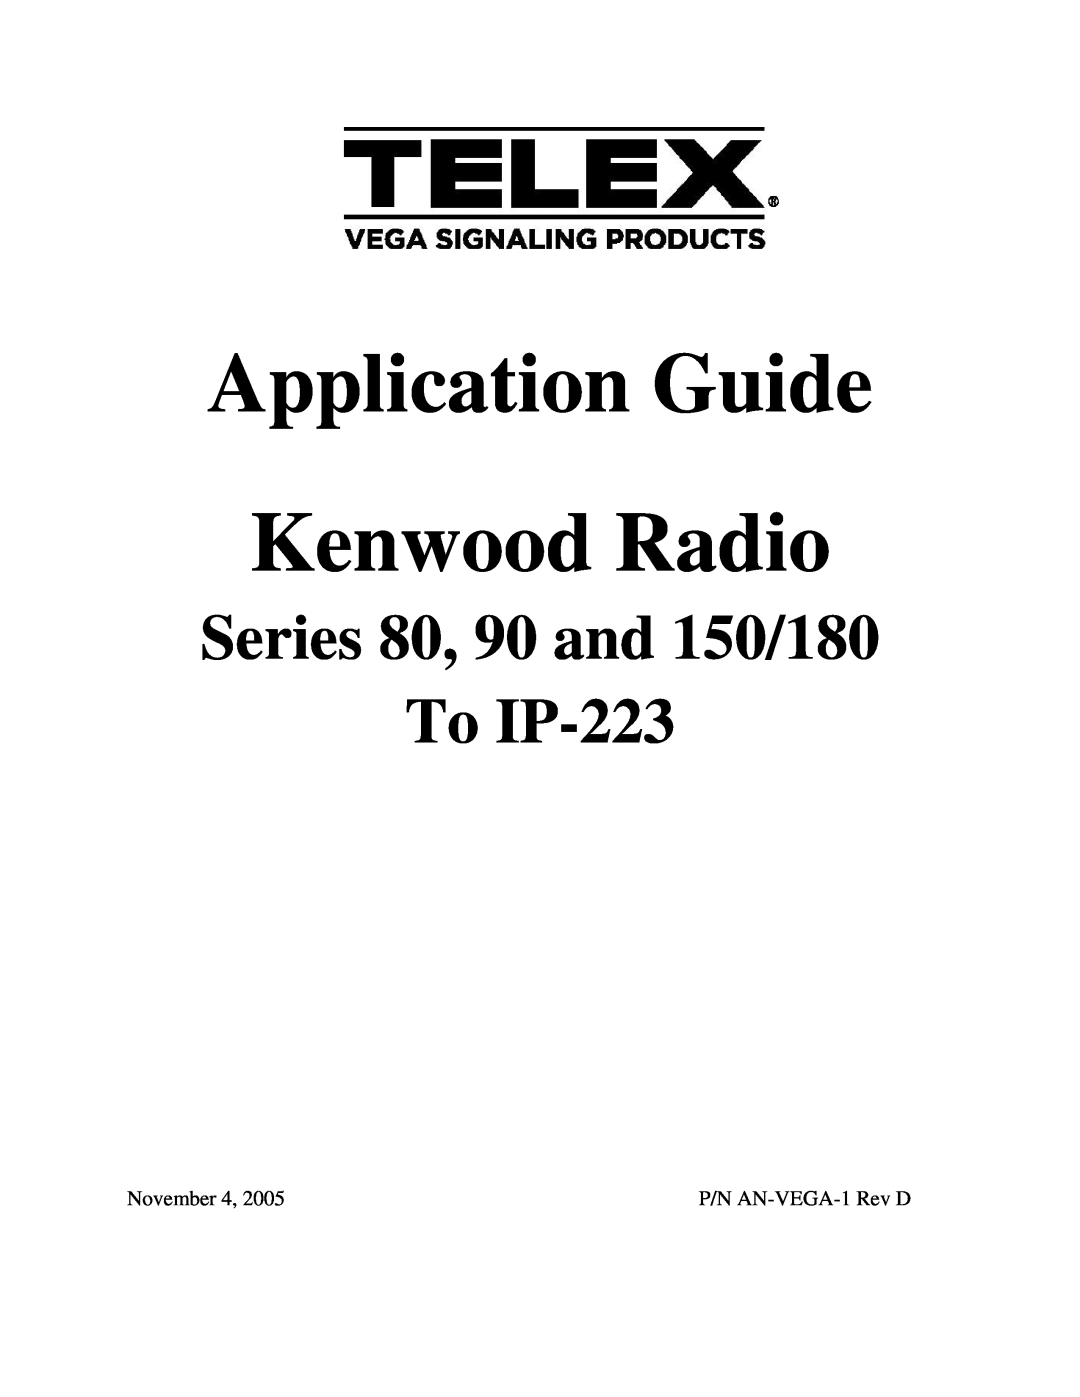 Telex manual Application Guide Kenwood Radio, Series 80, 90 and 150/180 To IP-223 